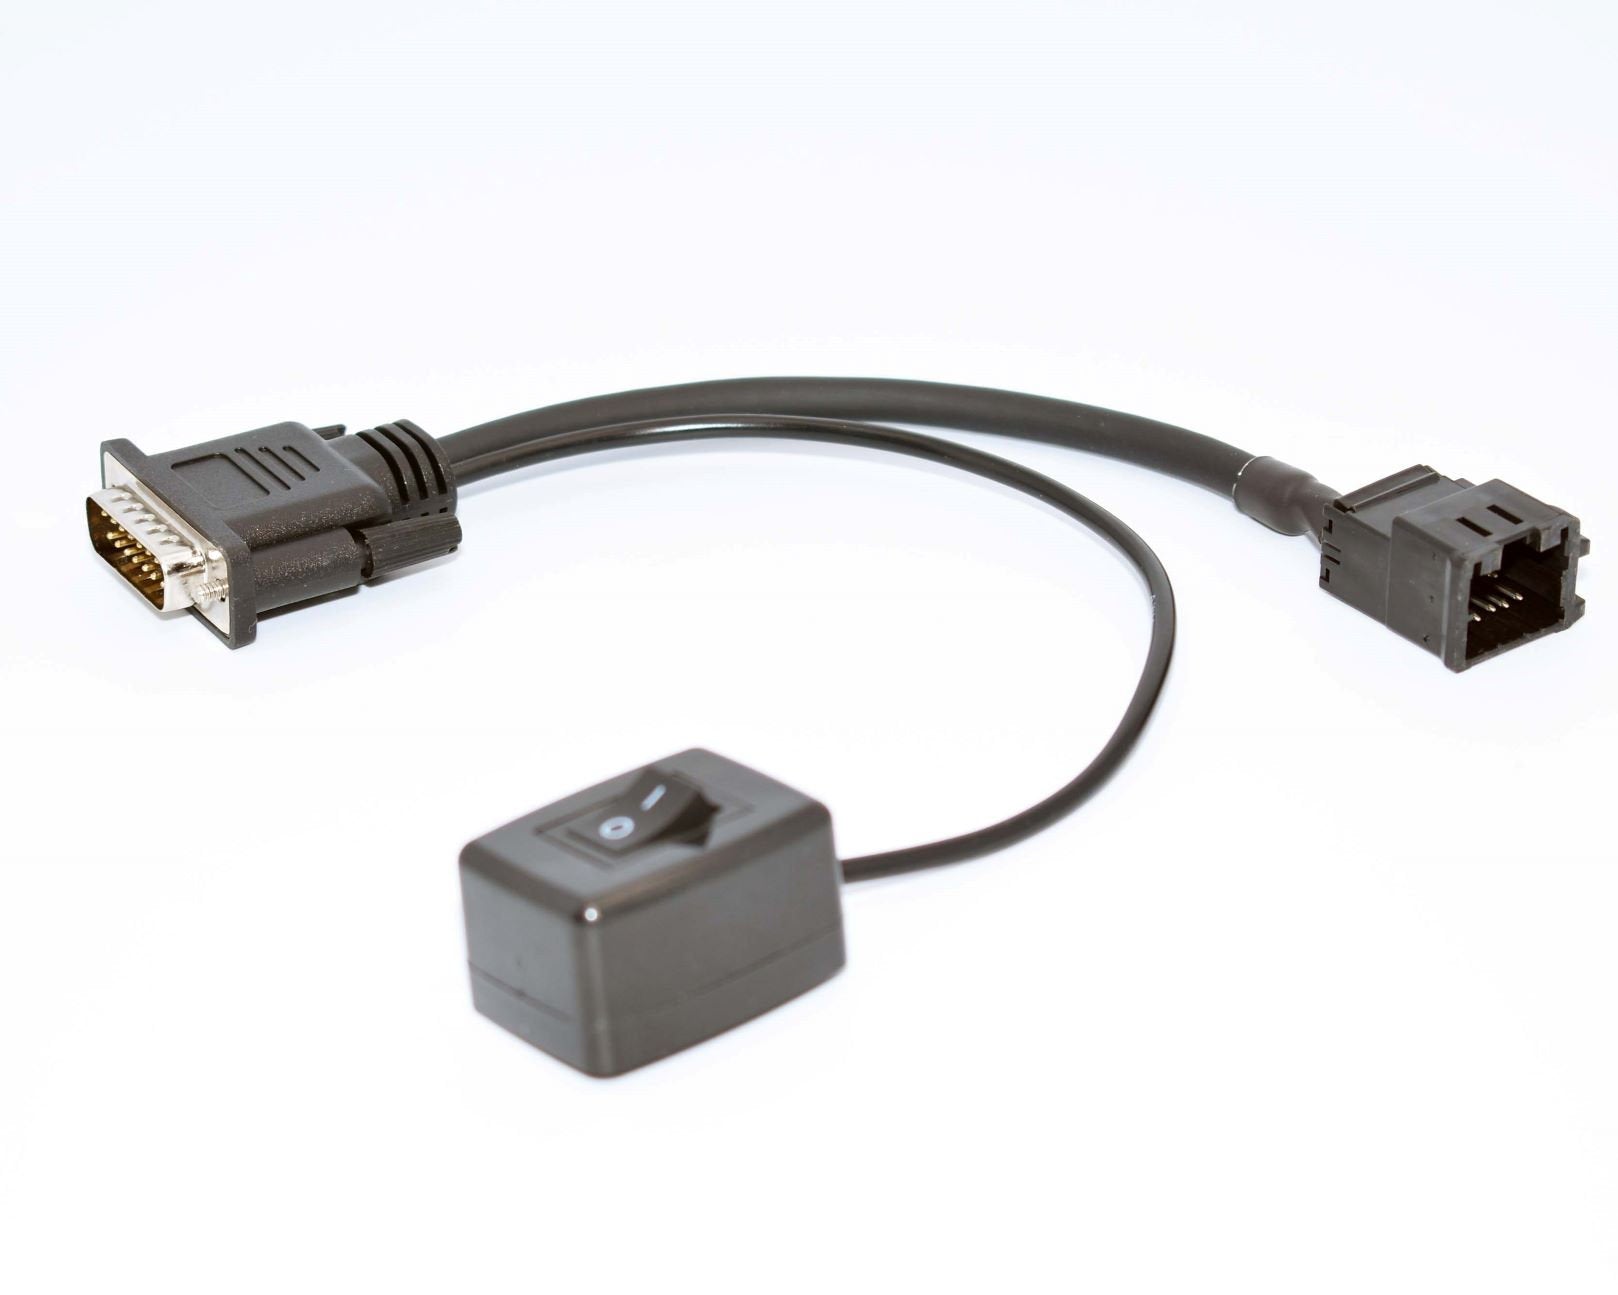 Terminal and cable Adapters to allow flexibility whilst tuning